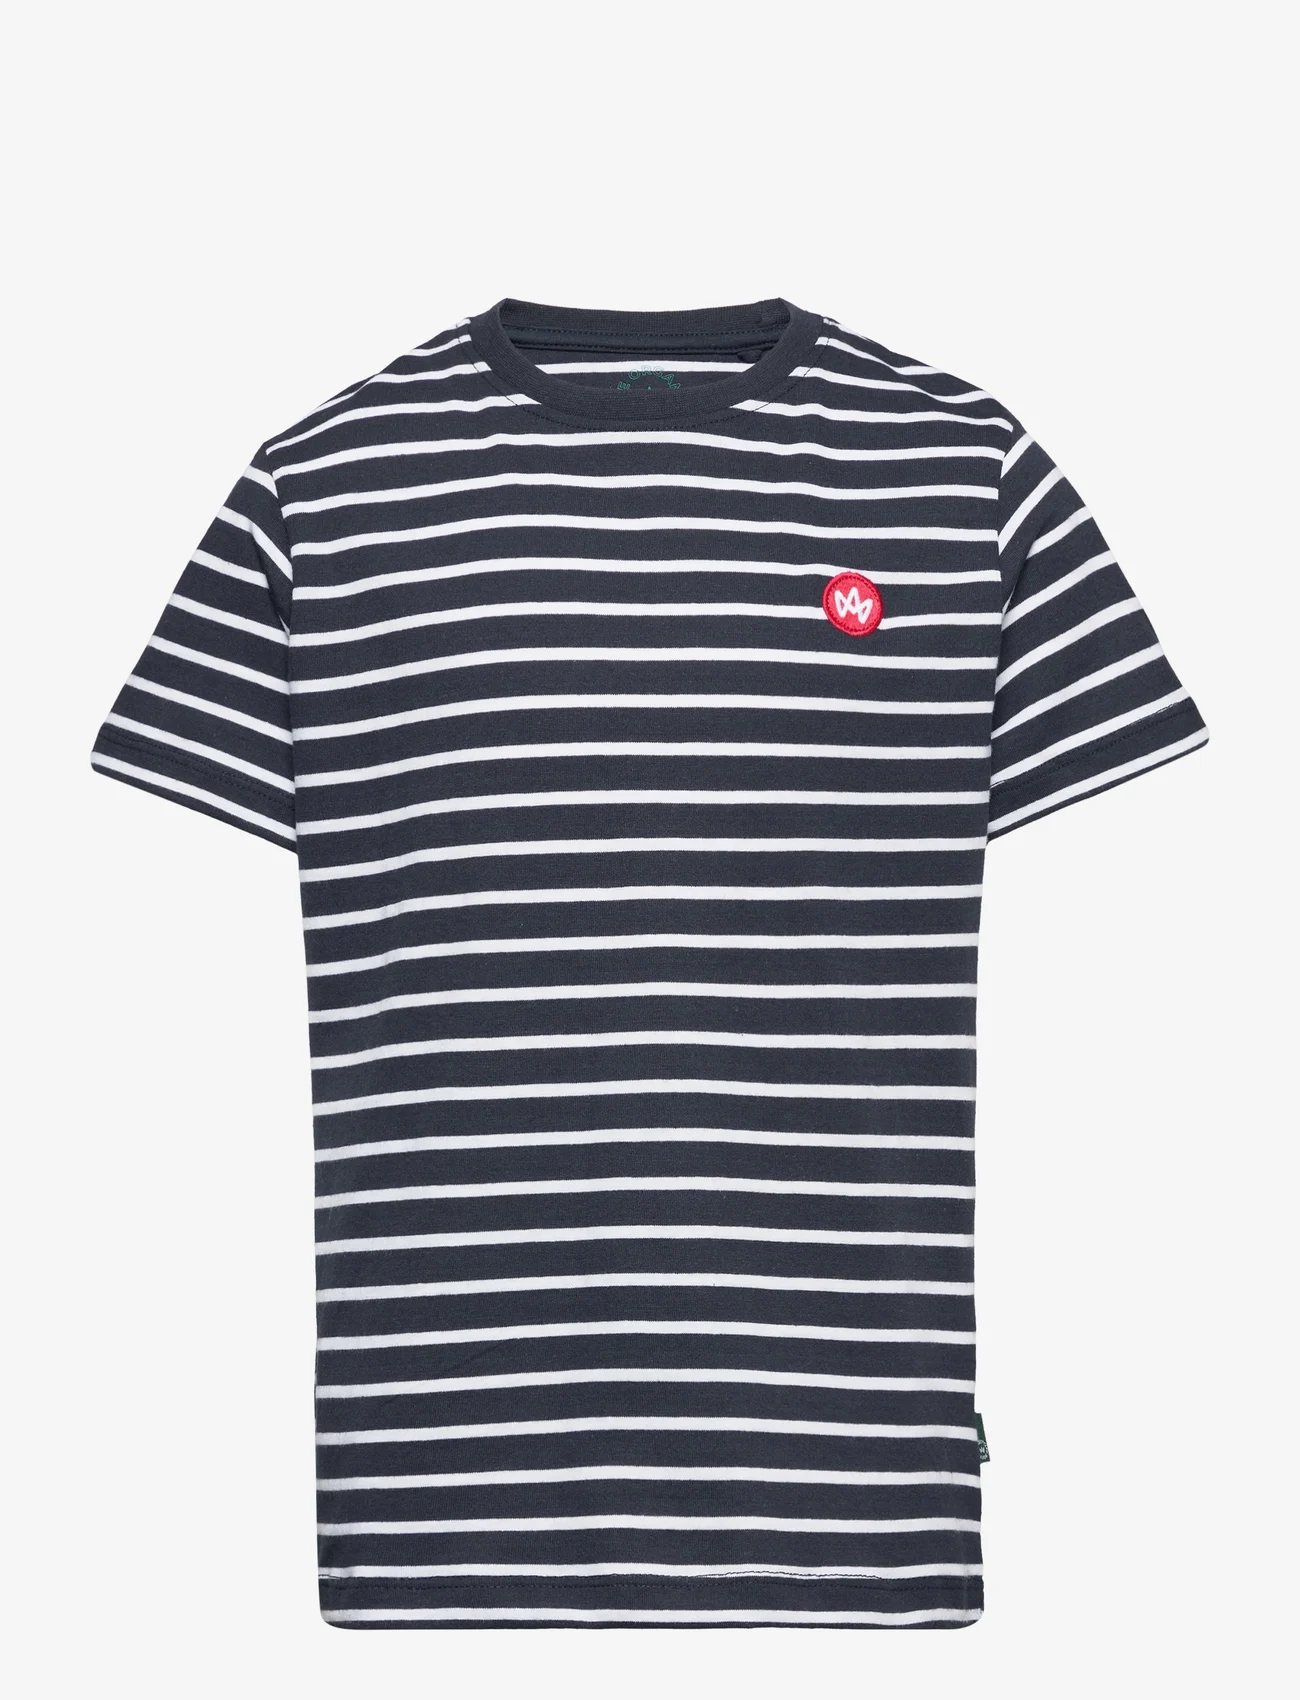 Kronstadt - Timmi Kids Organic/Recycled striped t-shirt - short-sleeved - navy / white - 0